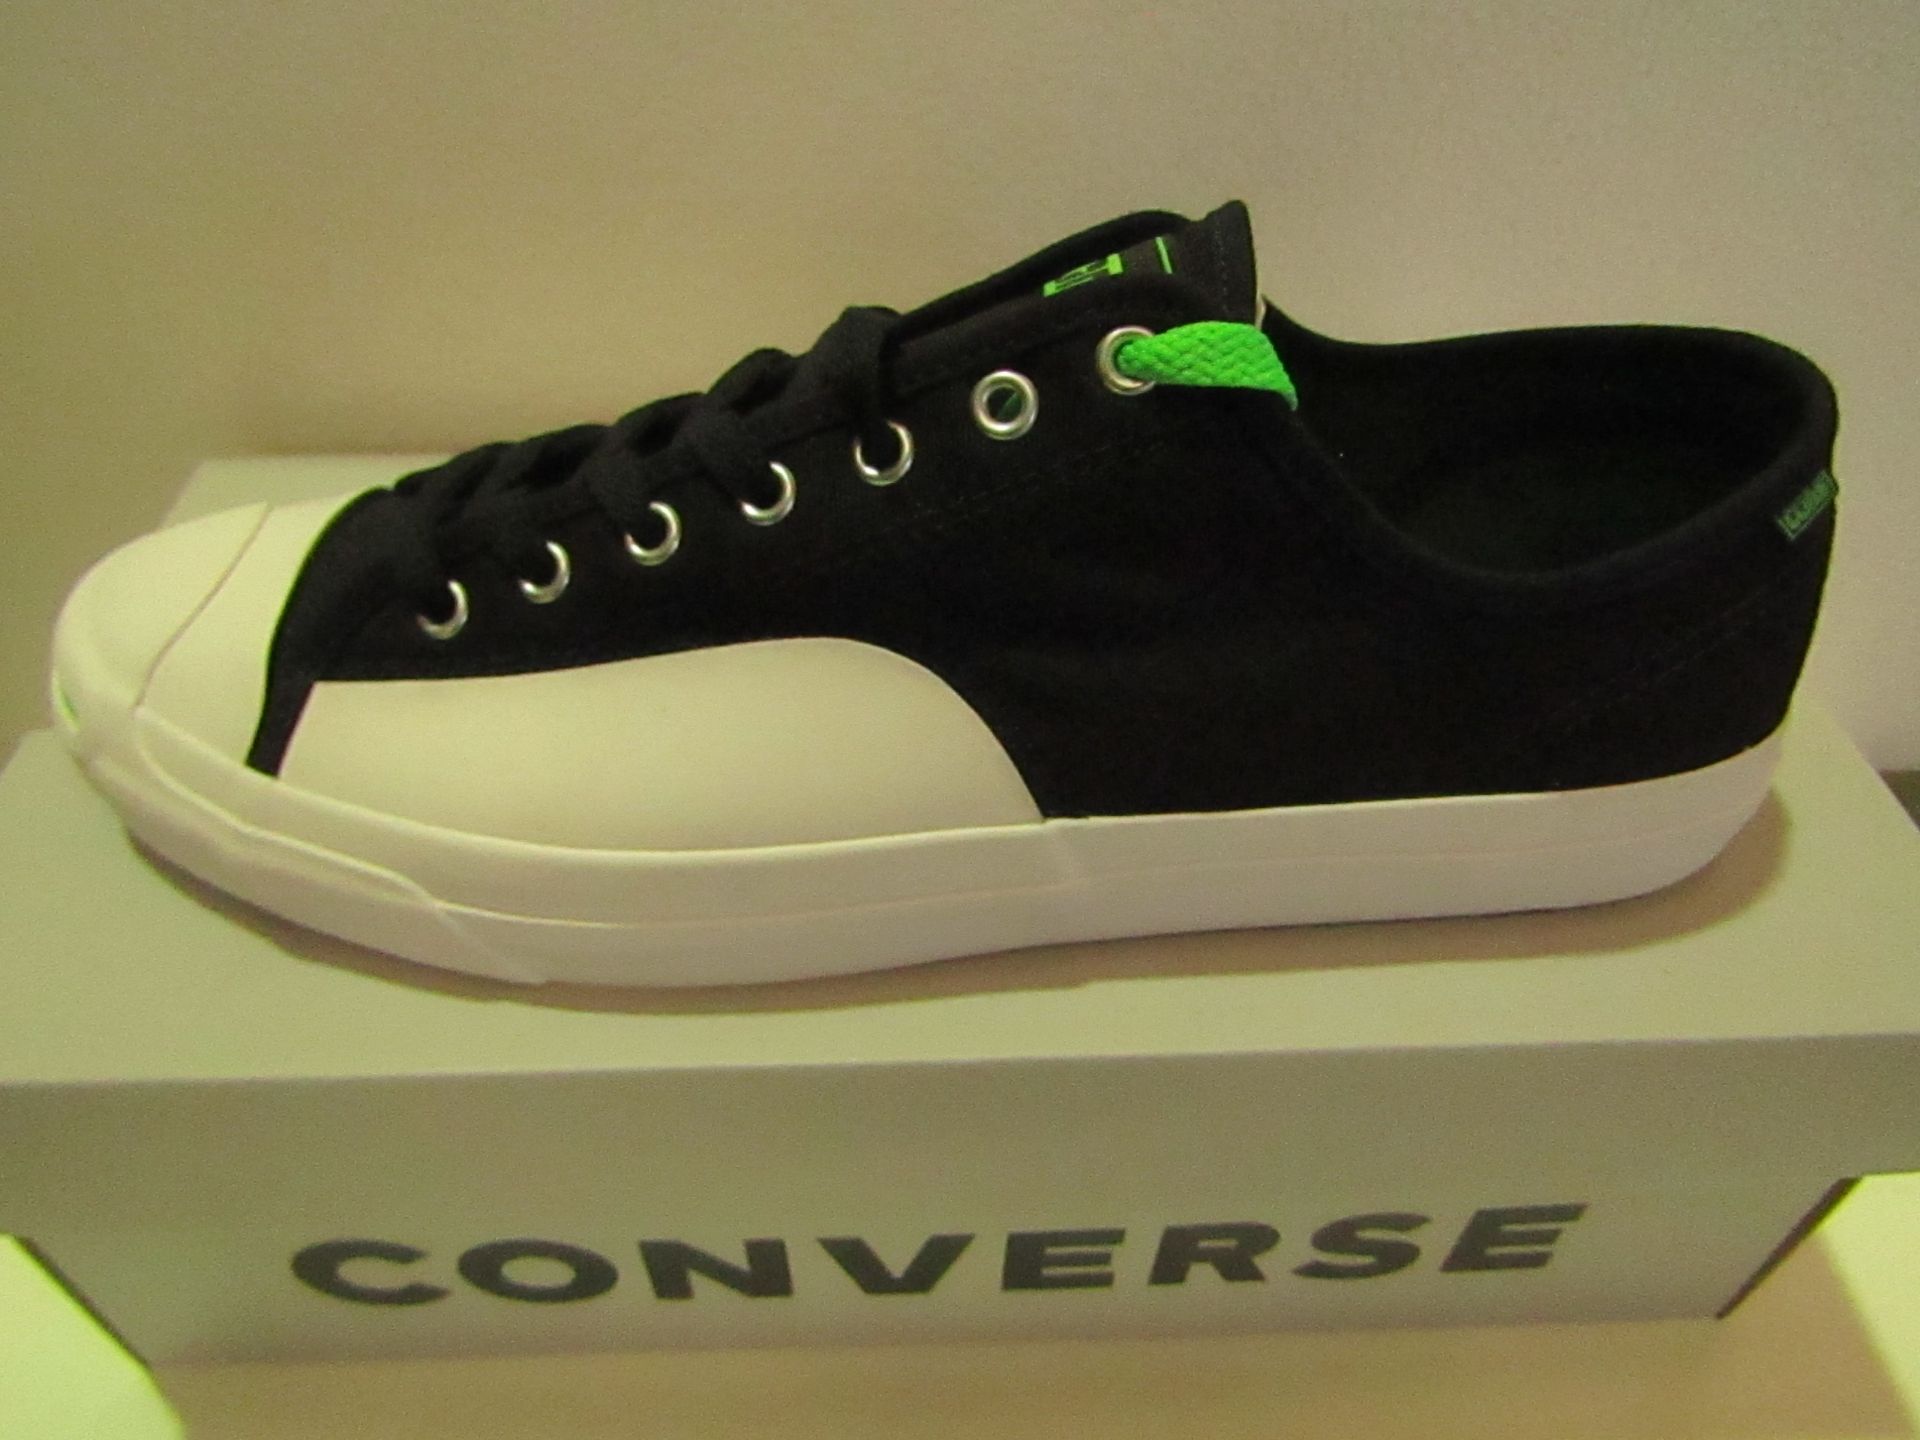 Converse Cons? Black/Acid Green Canvas Trainer size UK12 new & boxed see image for design